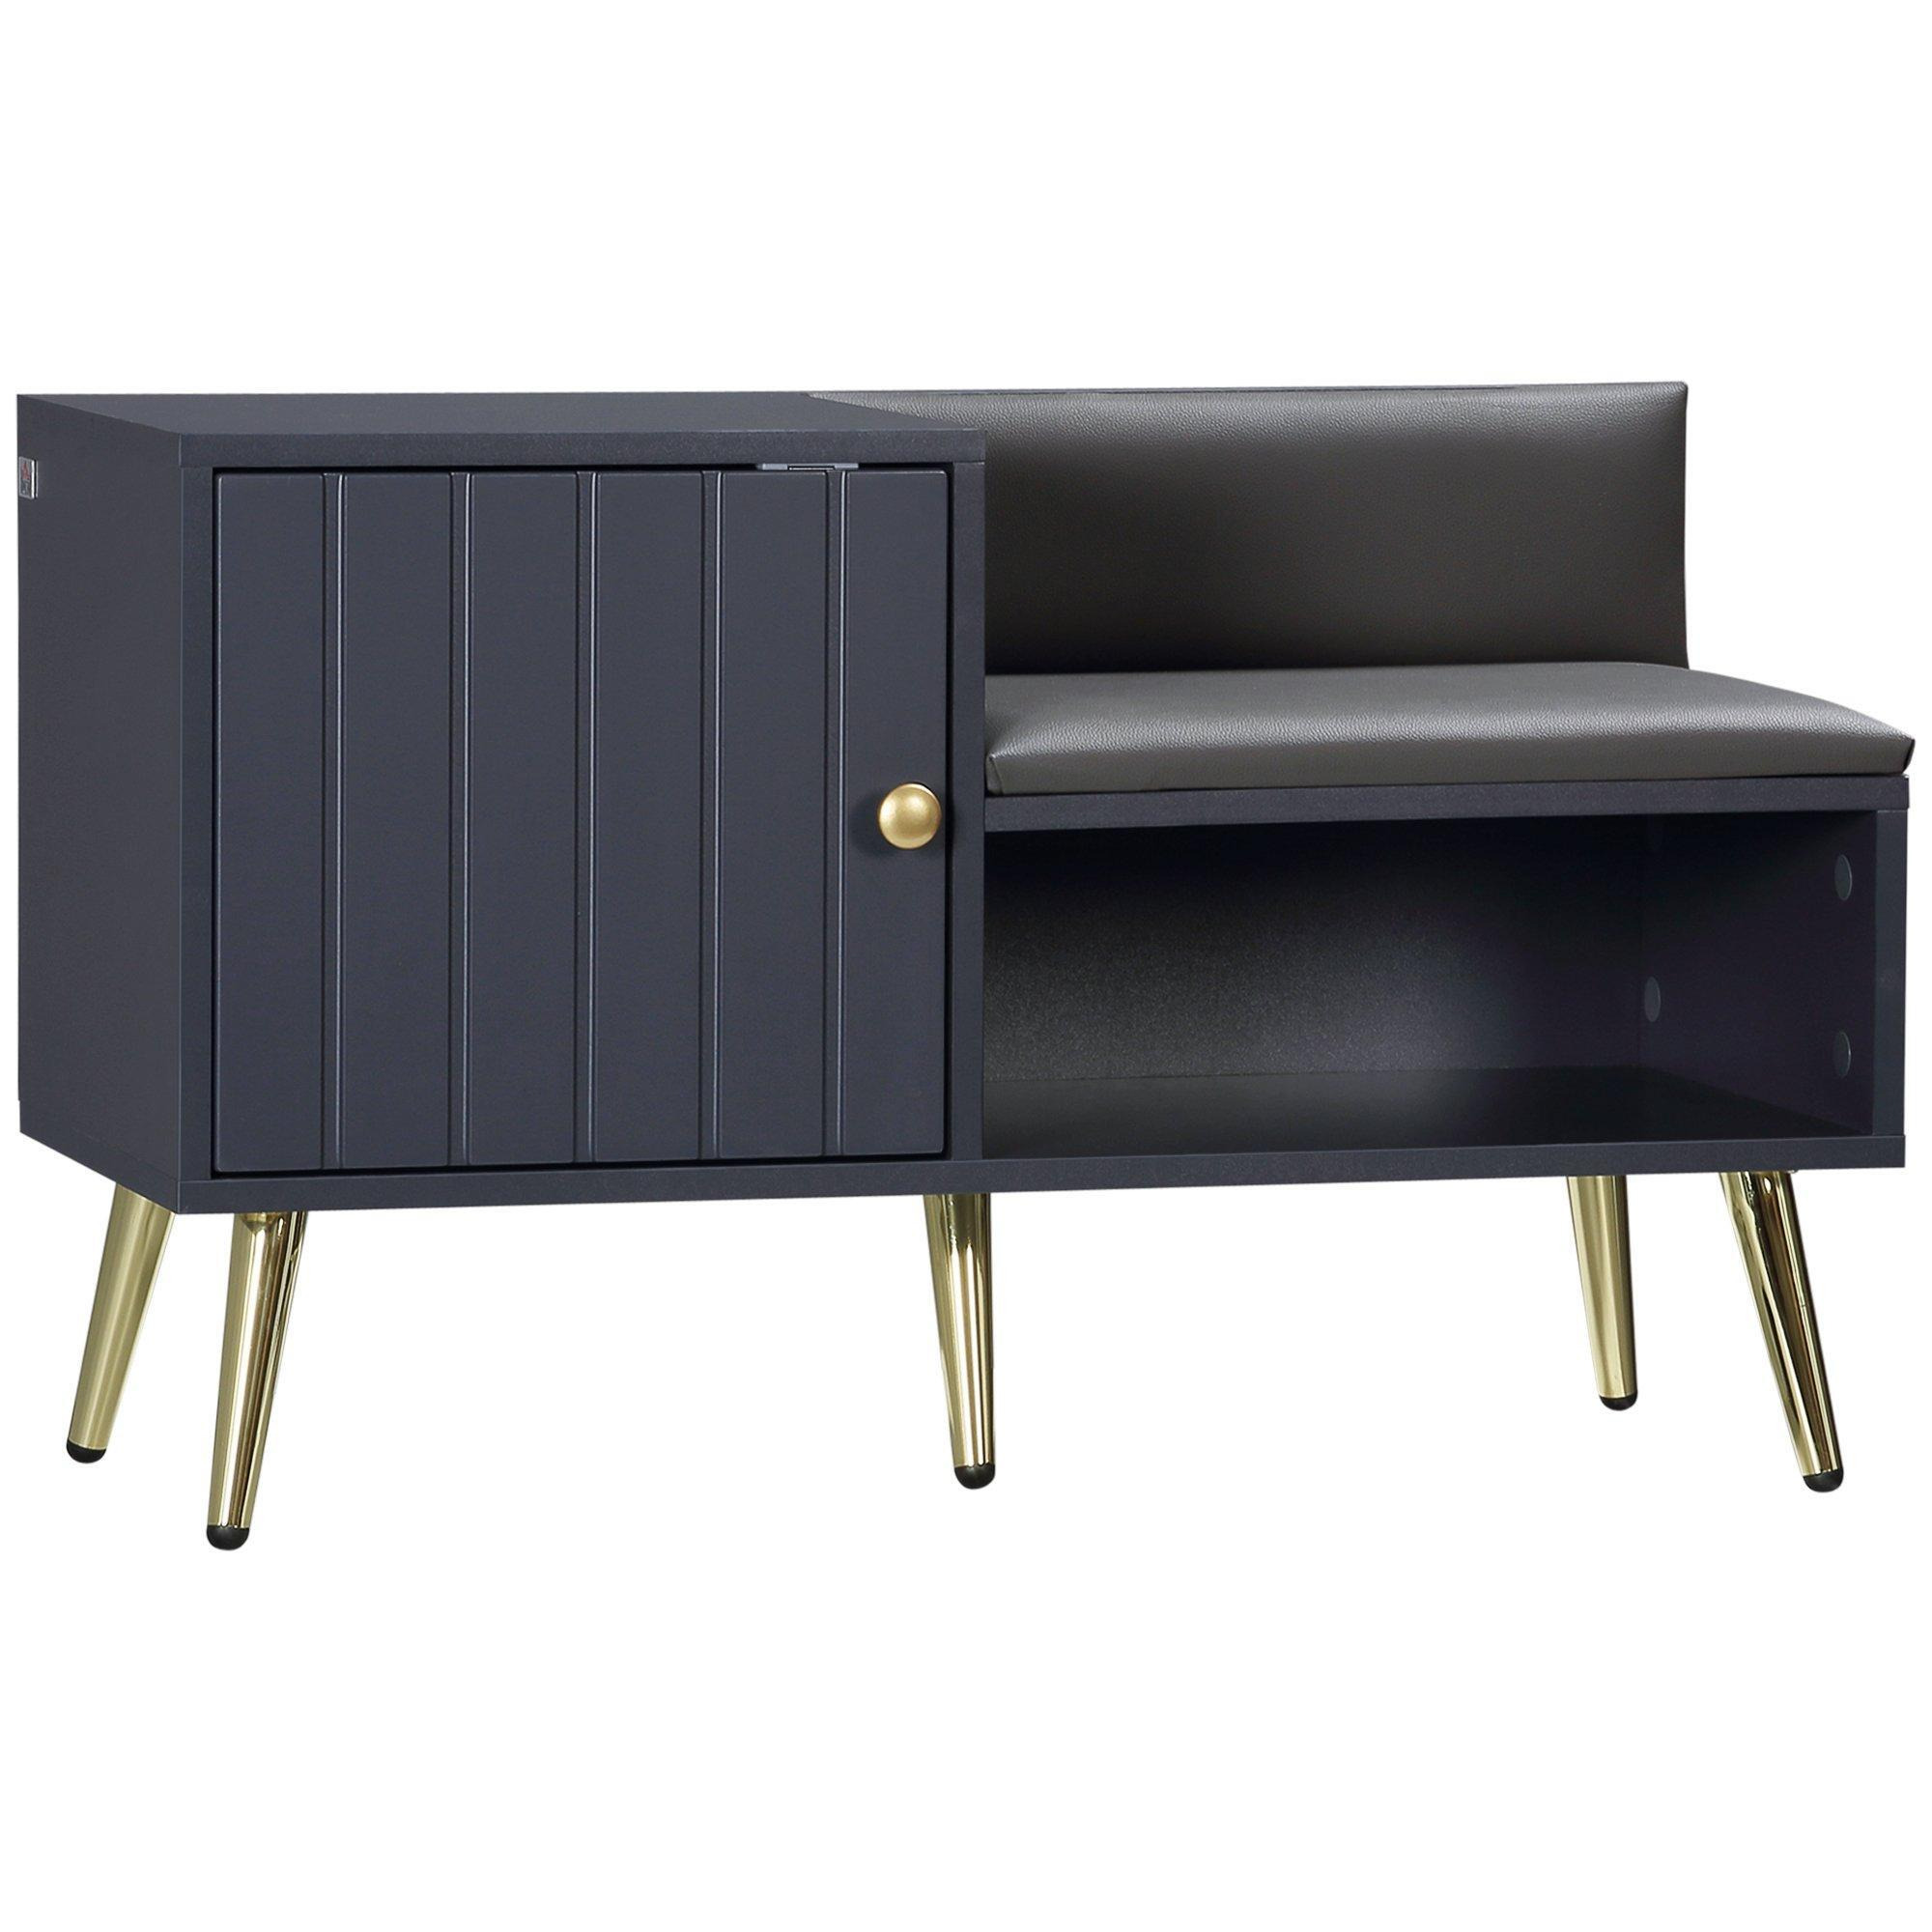 Shoe Bench with Storage Cabinet, Seating Cushion - image 1